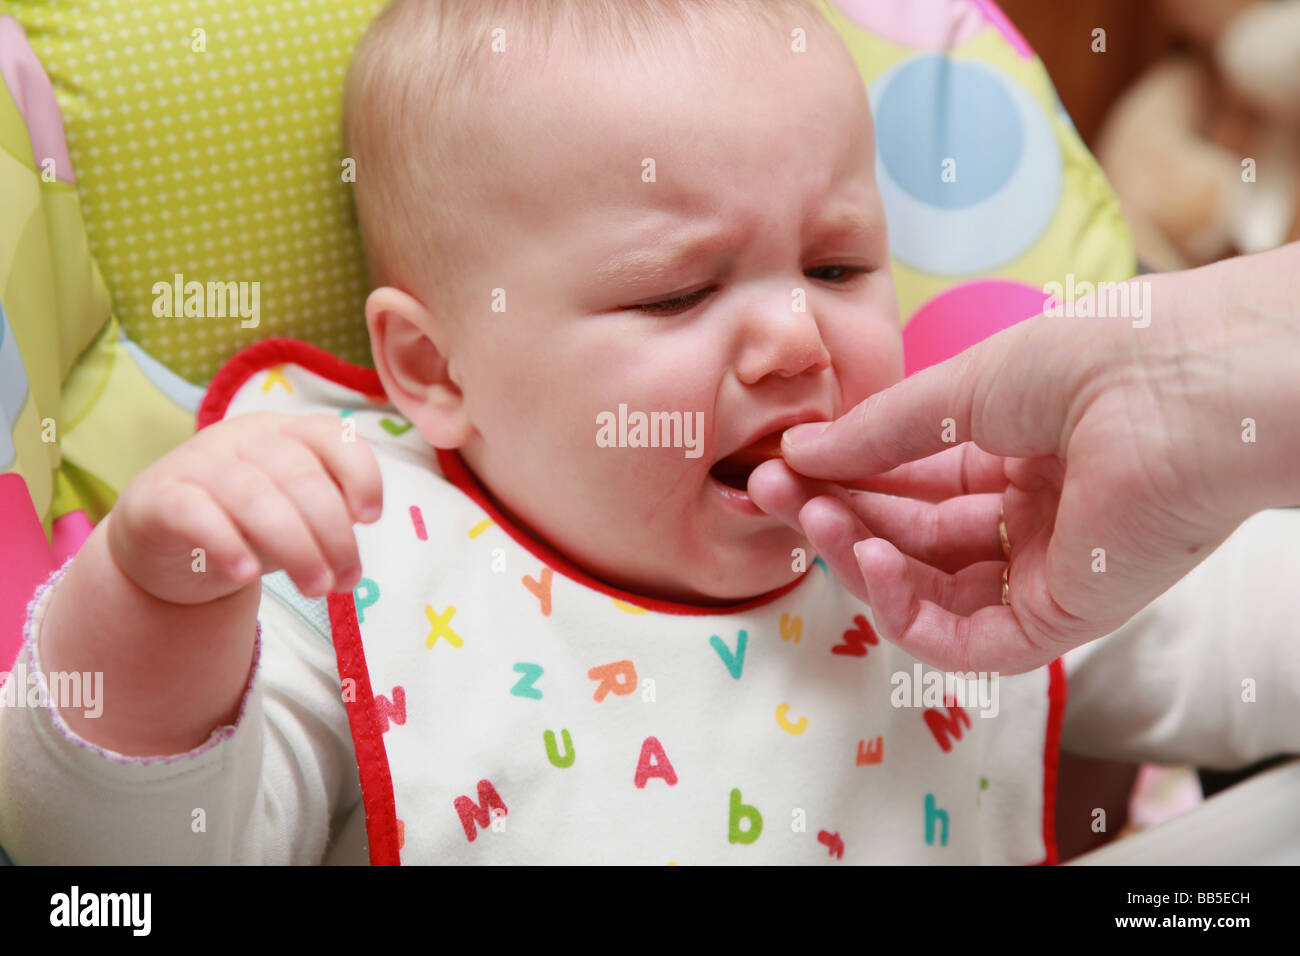 8 month old baby eating and drinking Stock Photo